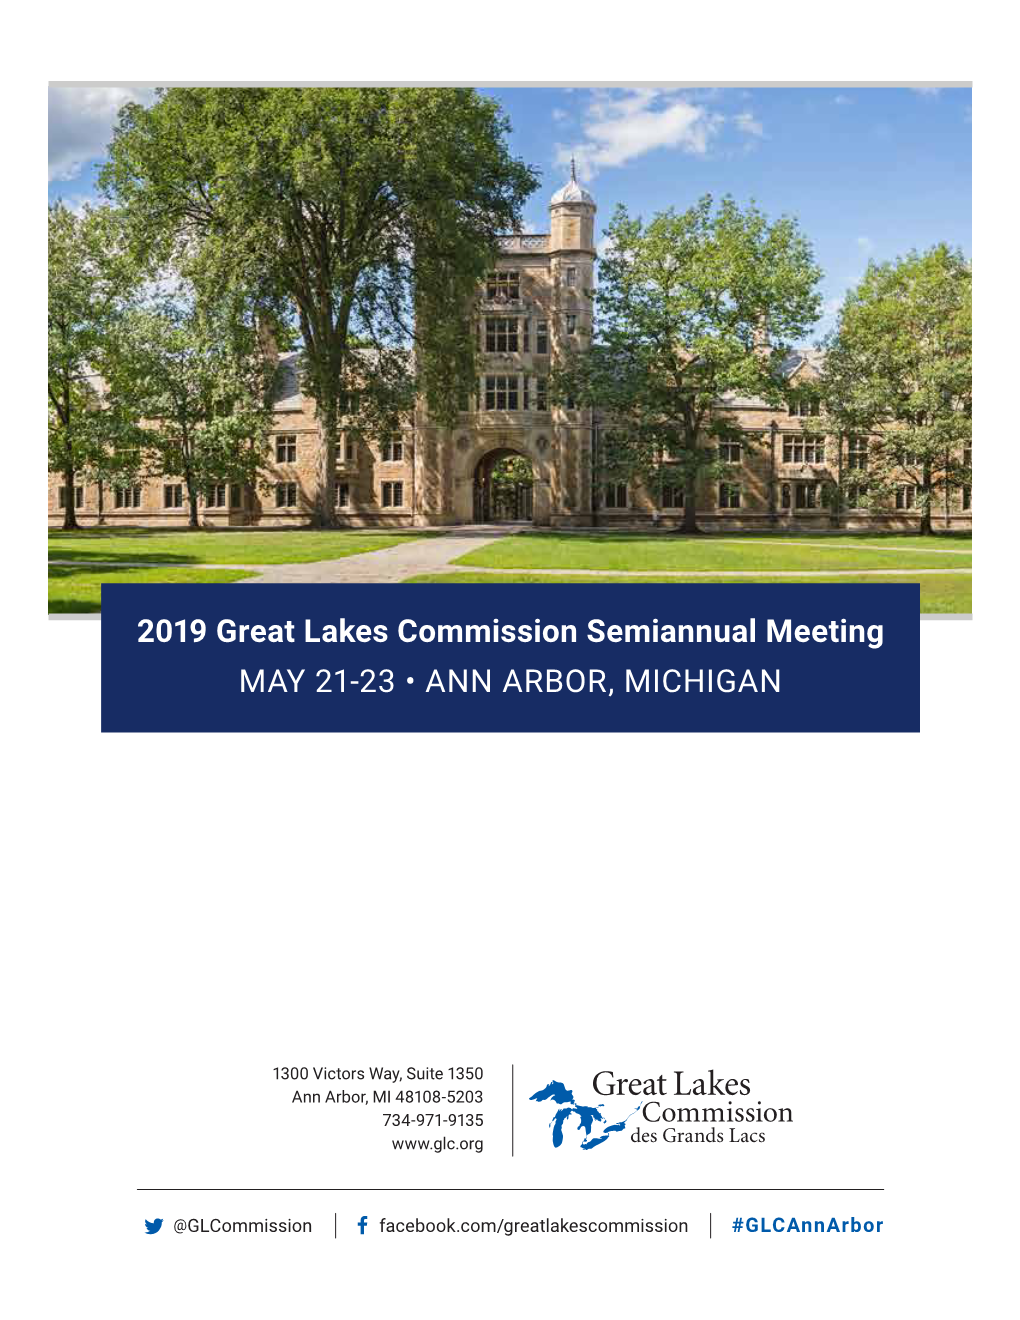 2019 Great Lakes Commission Semiannual Meeting MAY 21-23 • ANN ARBOR, MICHIGAN